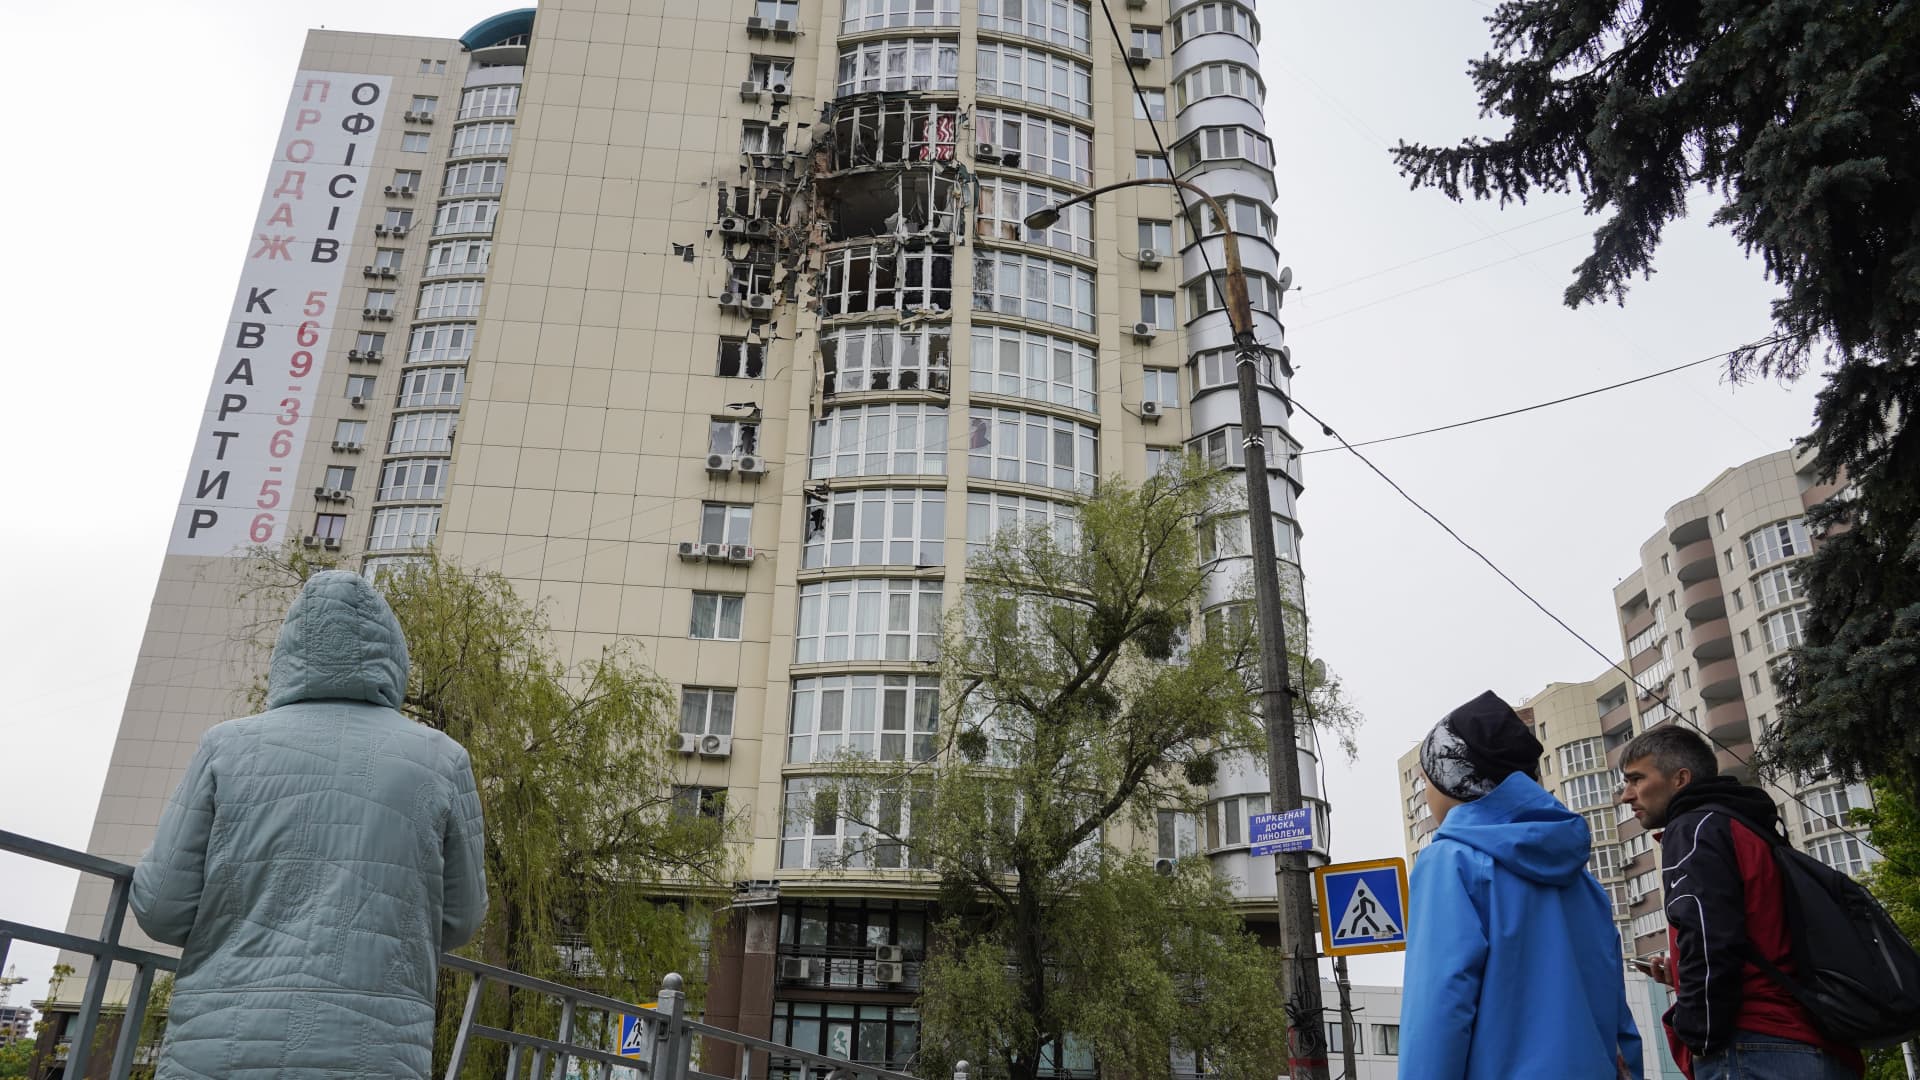 A building was damaged by the wreckage of a Russian drone in Kyiv, Ukraine, on May 8, 2023. On the night of May 8, air defense forces destroyed more than 30 combat drones over Kyiv